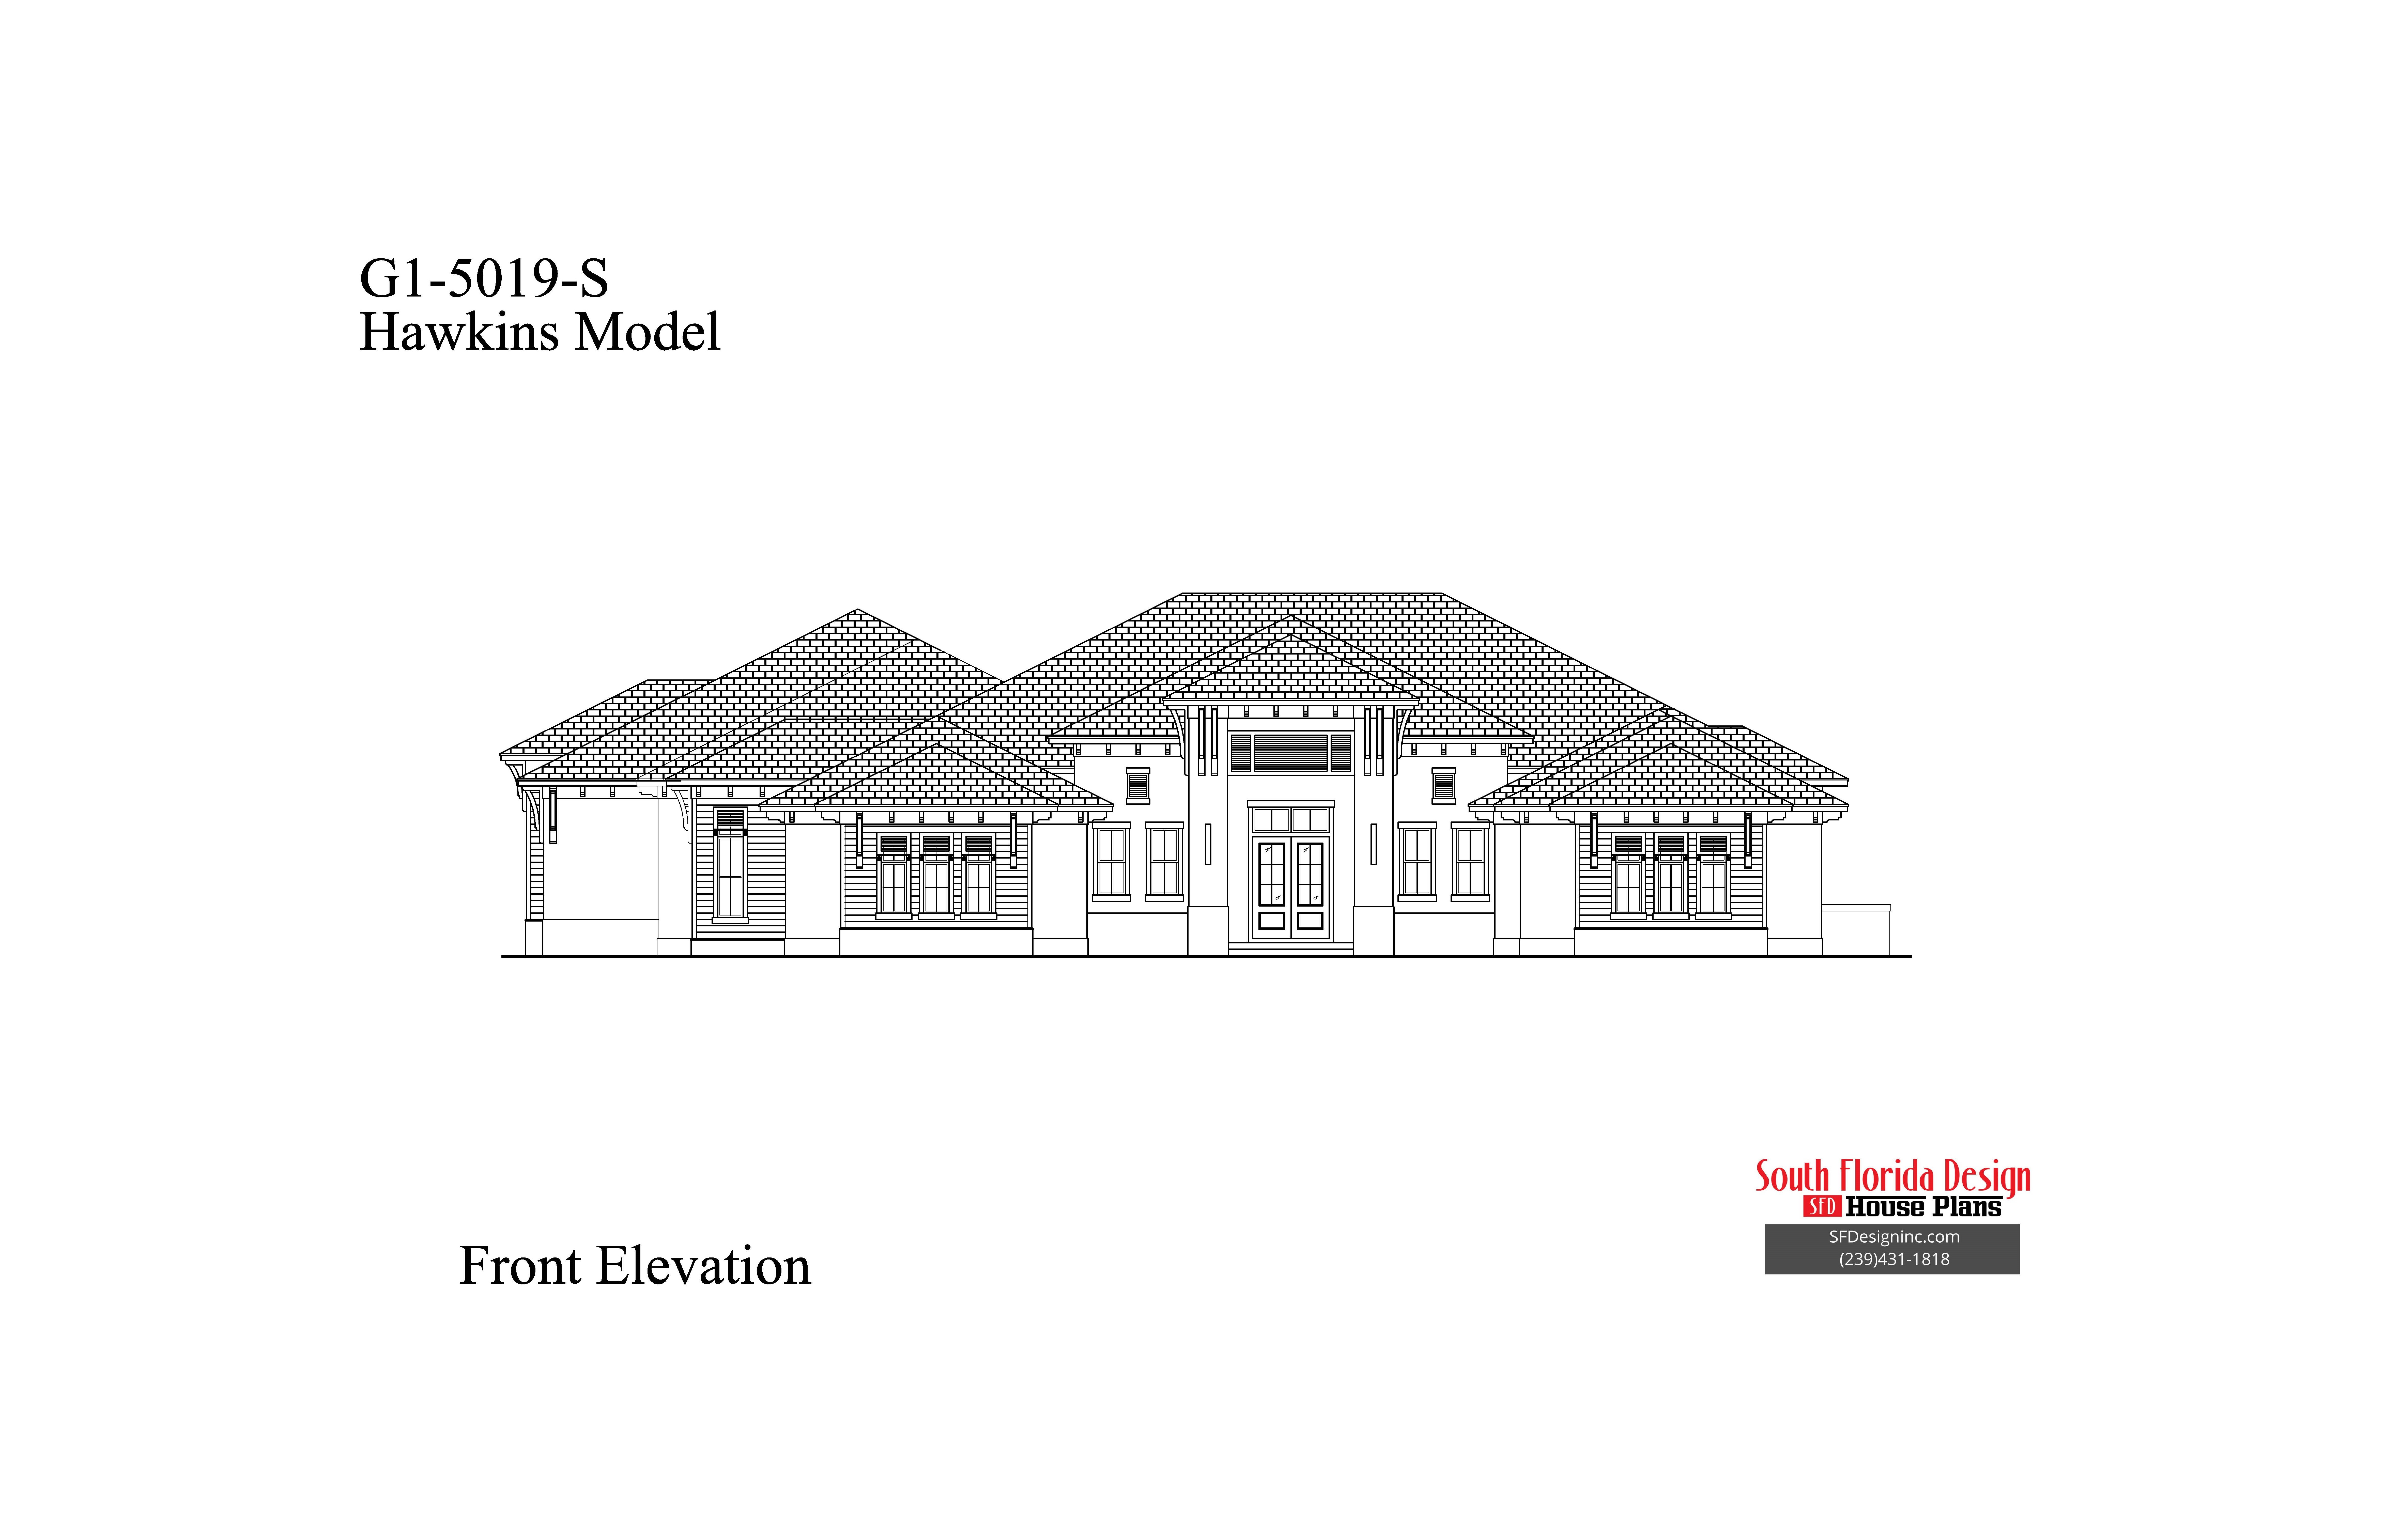 Black and white front elevation sketch of a 1-story 5019st house plan